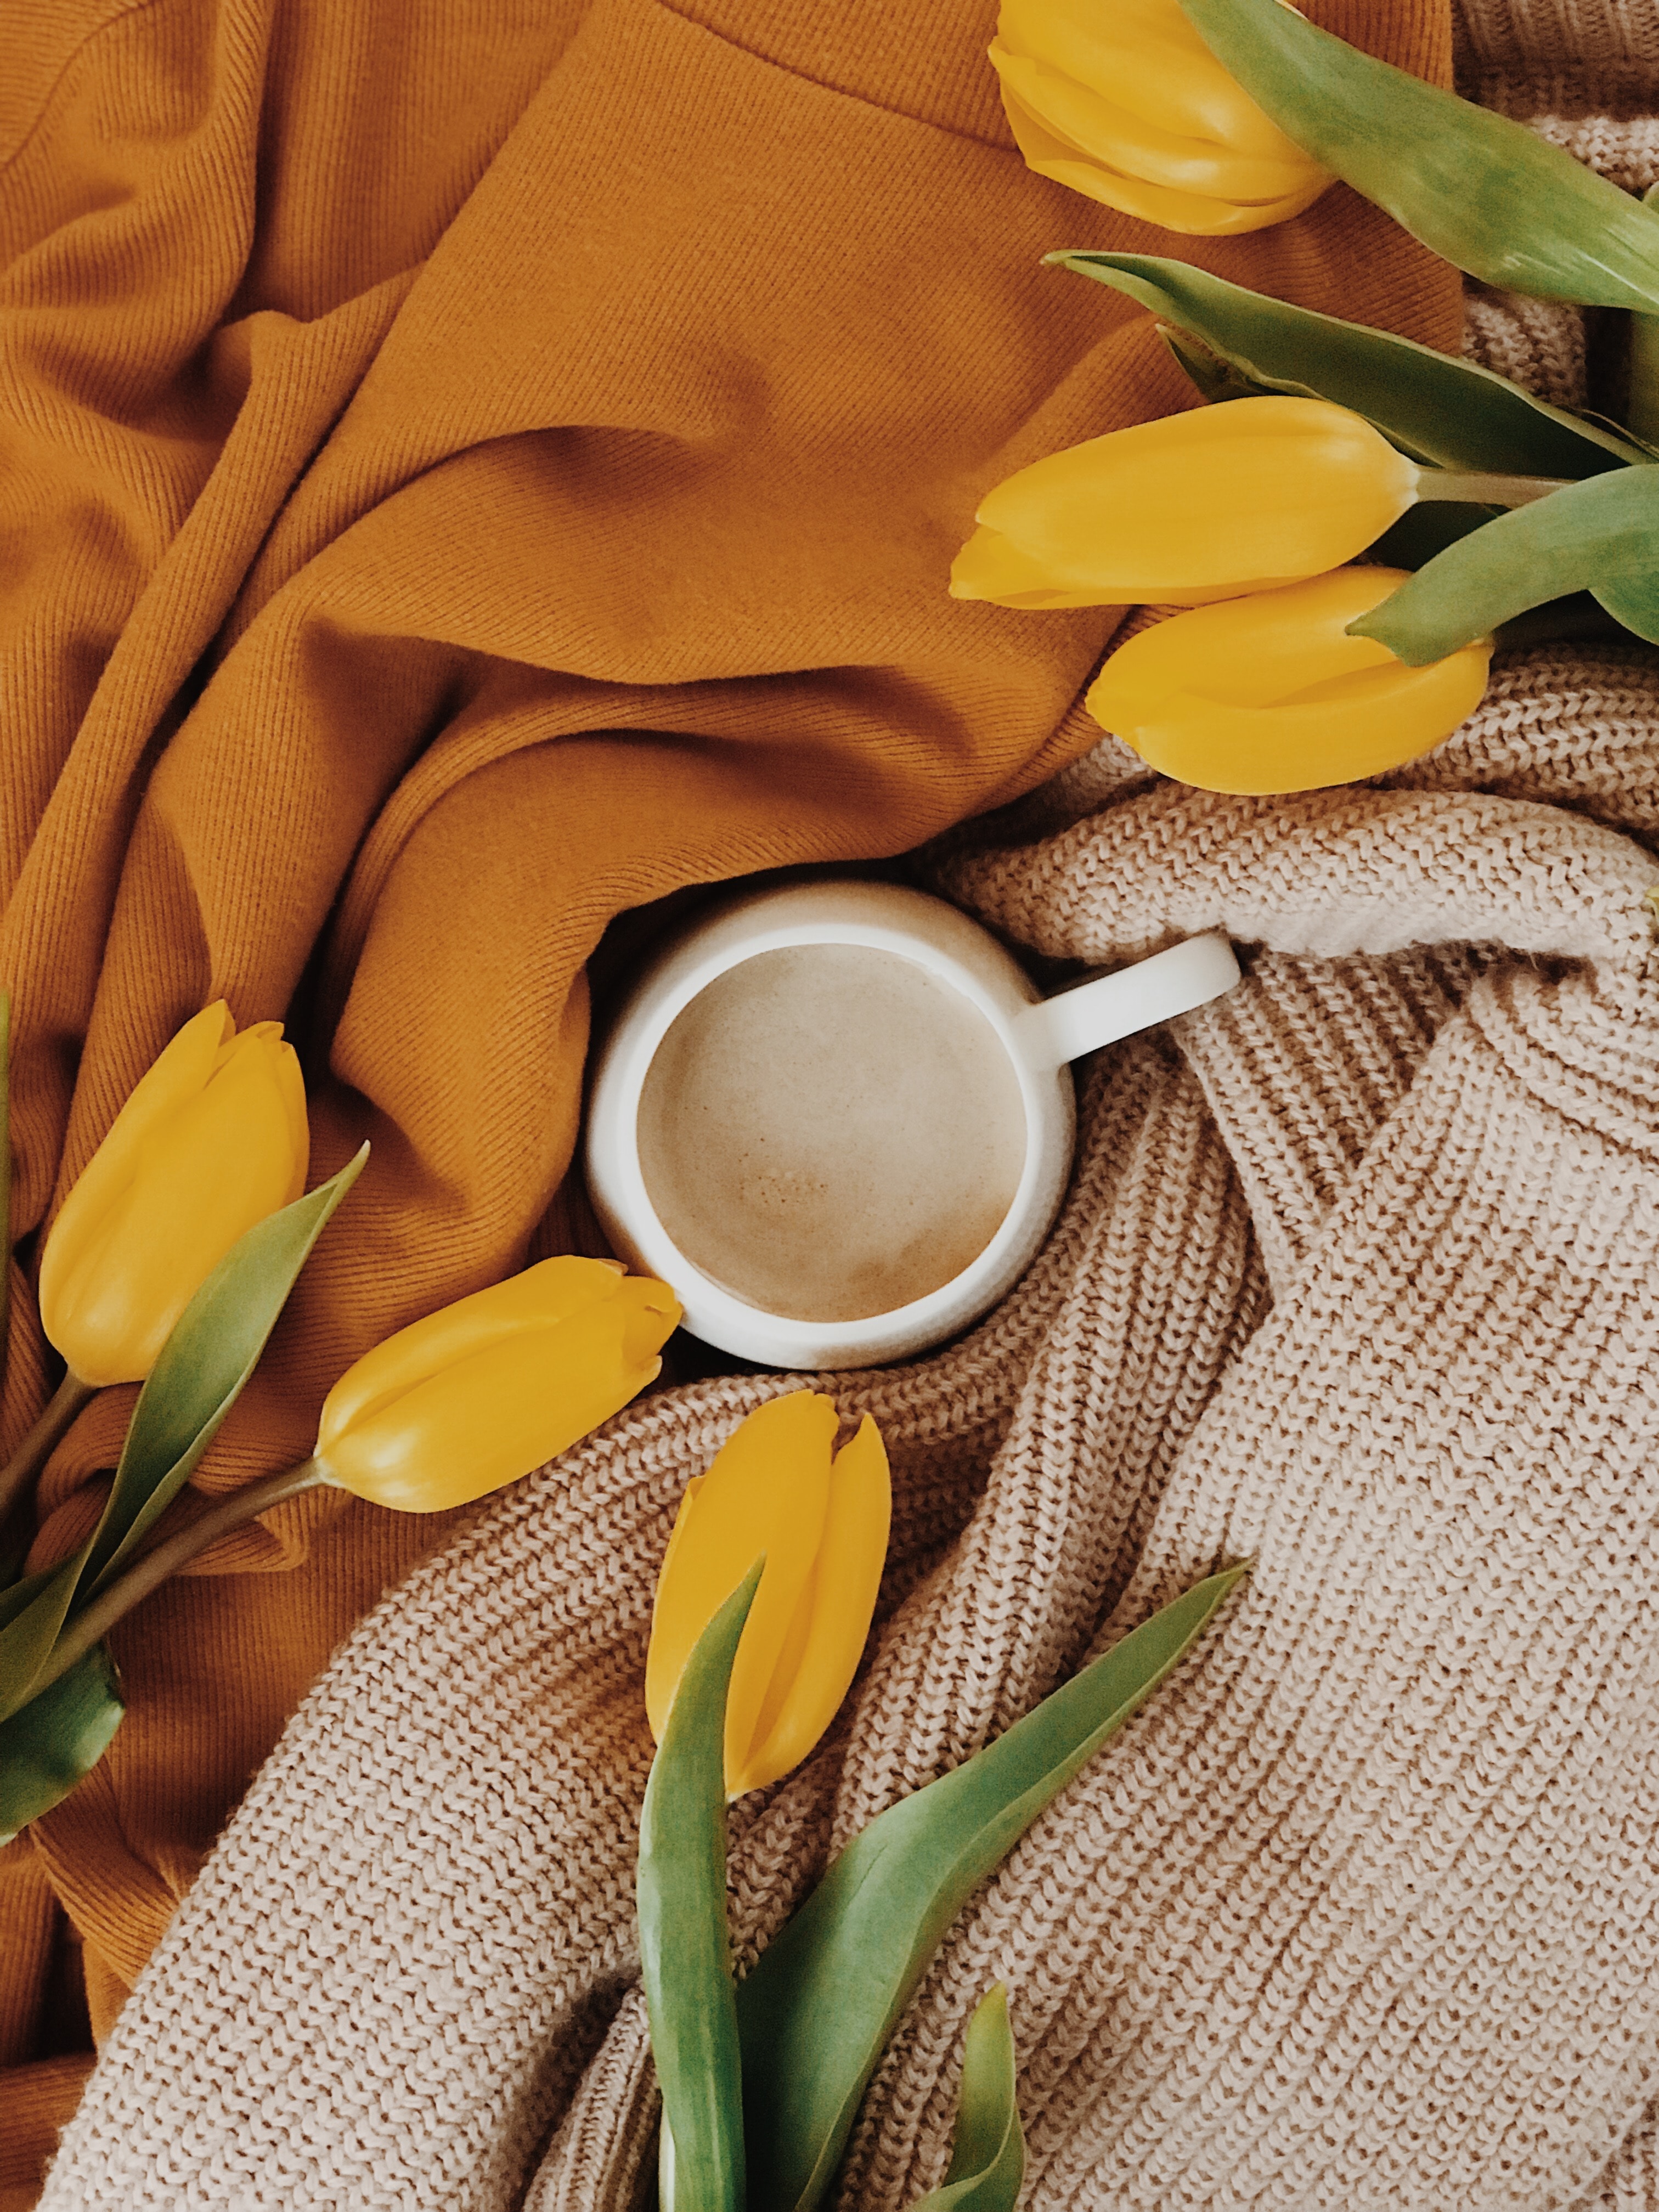 tulips, beverage, flowers, yellow, cup, drink wallpaper for mobile